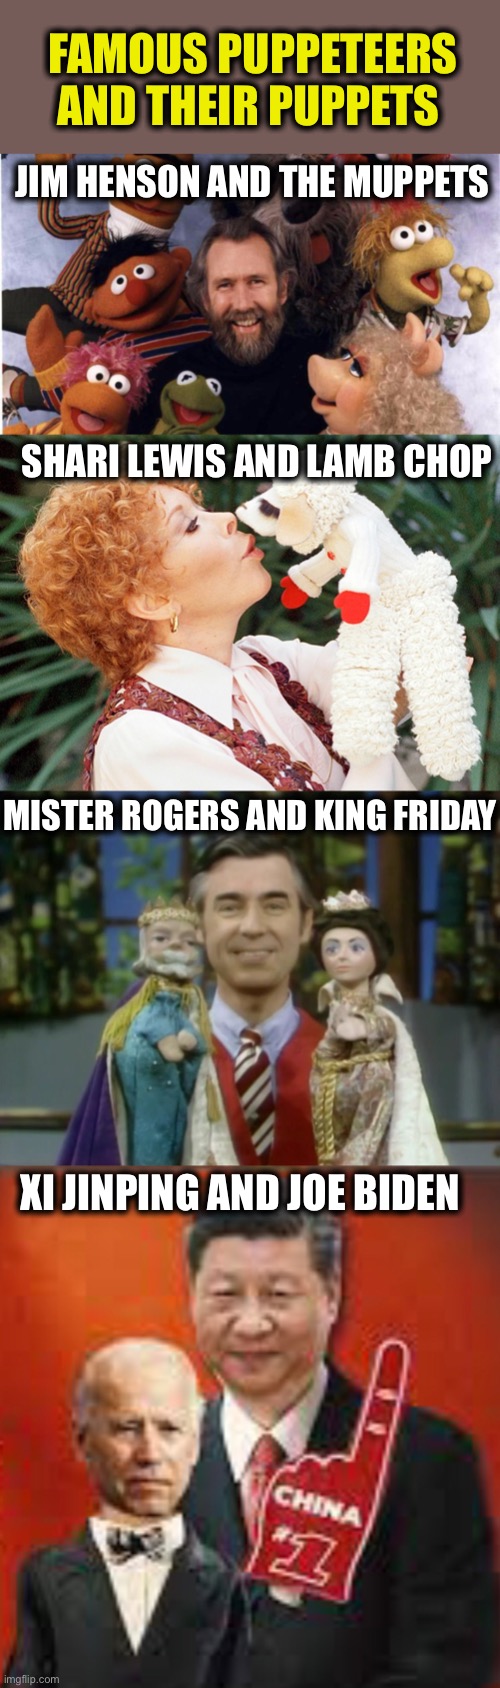 Puppets | FAMOUS PUPPETEERS AND THEIR PUPPETS; JIM HENSON AND THE MUPPETS; SHARI LEWIS AND LAMB CHOP; MISTER ROGERS AND KING FRIDAY; XI JINPING AND JOE BIDEN | image tagged in joe biden,xi jinping,mr rogers,the muppets,china,memes | made w/ Imgflip meme maker